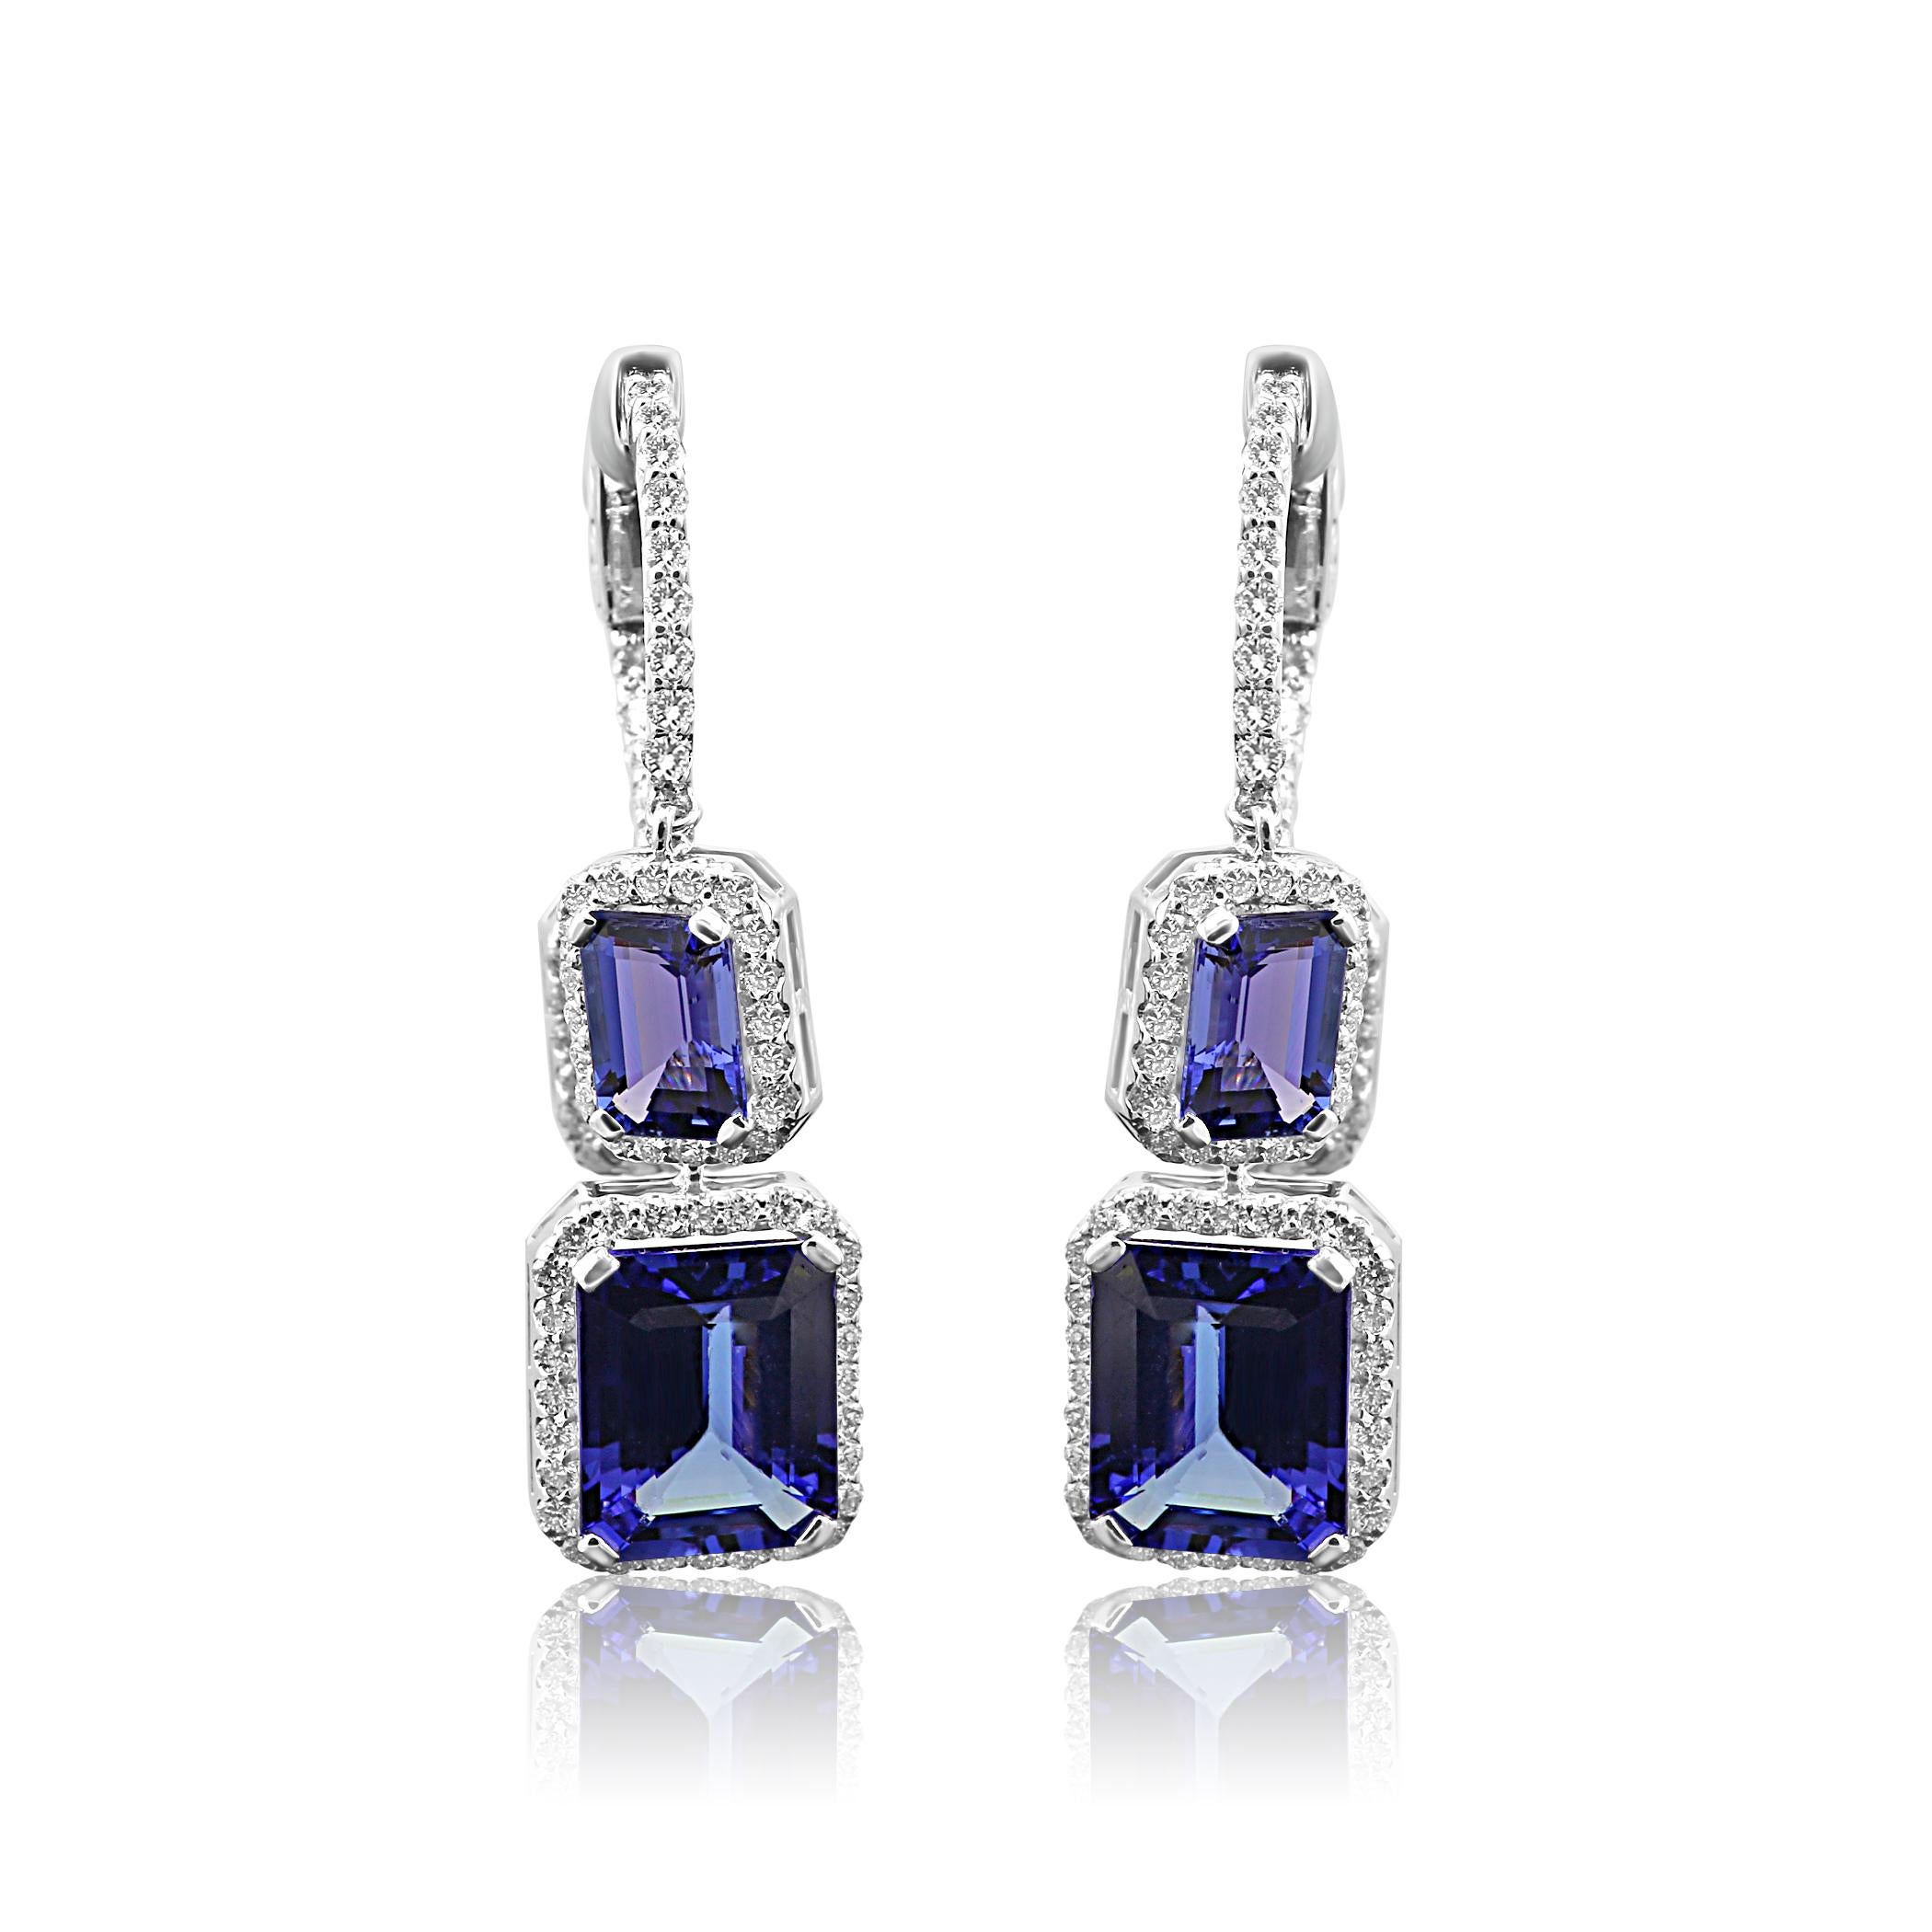 Stunning 2 Emerald cut Tanzanites 6.15 Carat with 4 smaller Tanazanites 4.47 Carat set in Halo White G-H color VS-SI Diamond Rounds 1.65 Carat set in Gorgeous Halo style Dangle Drop Earring in 14K White Gold.

Style available in different price